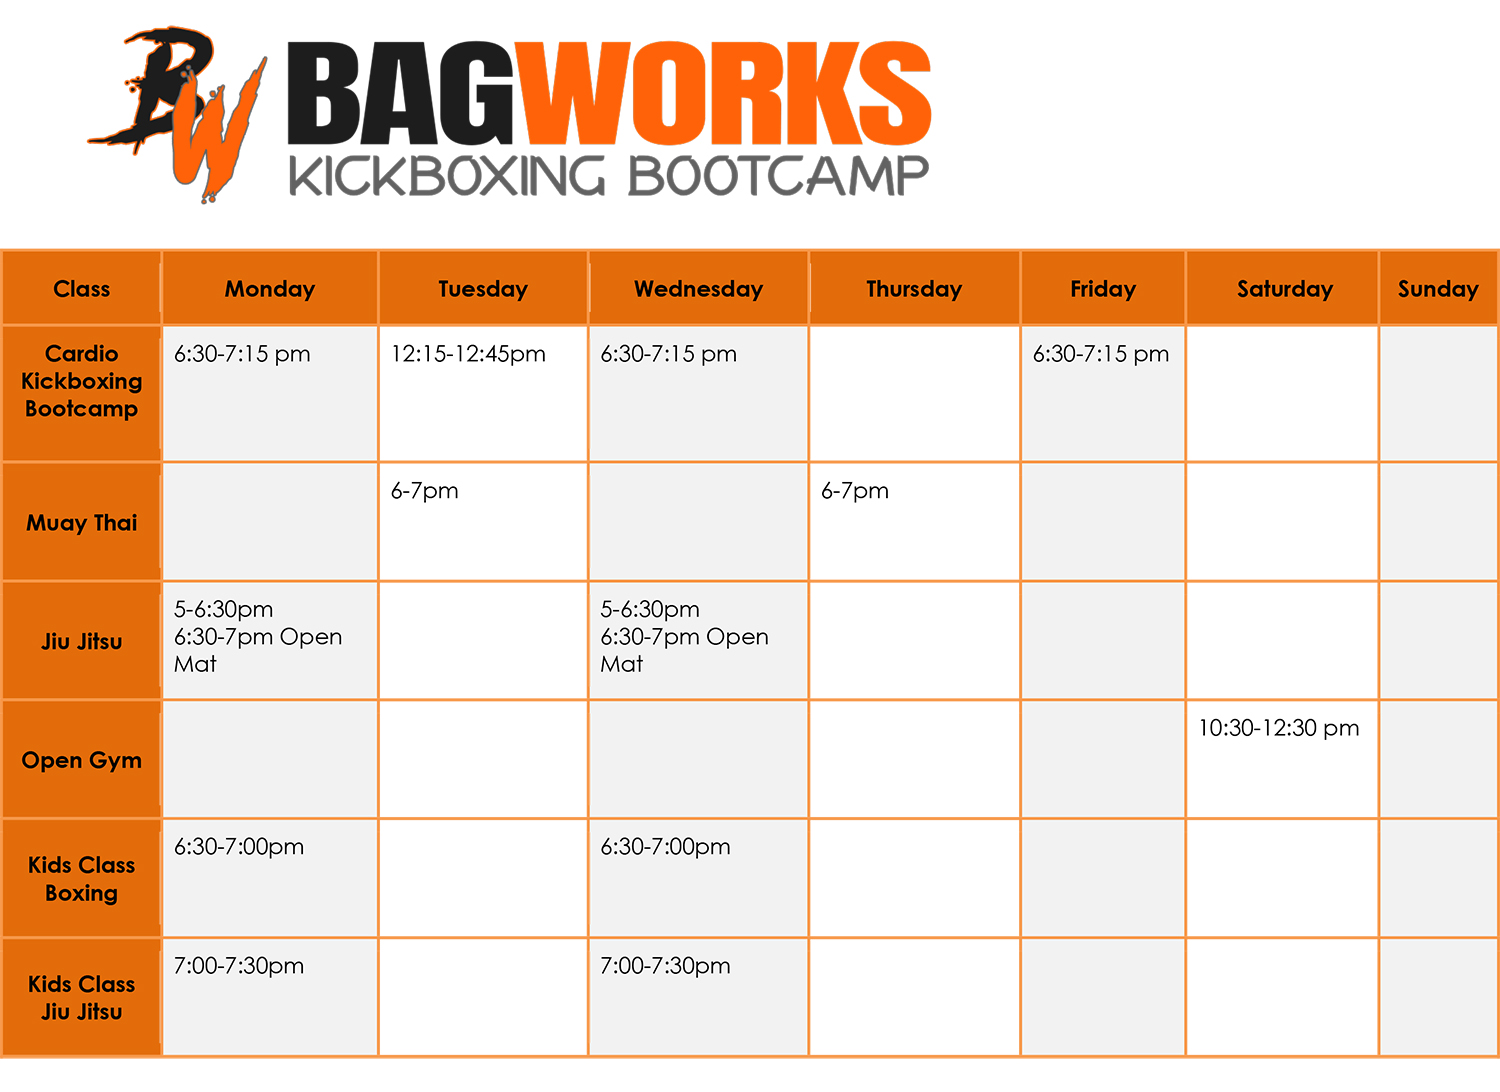 Bagworks Kickboxing Bootcamp Class Schedule